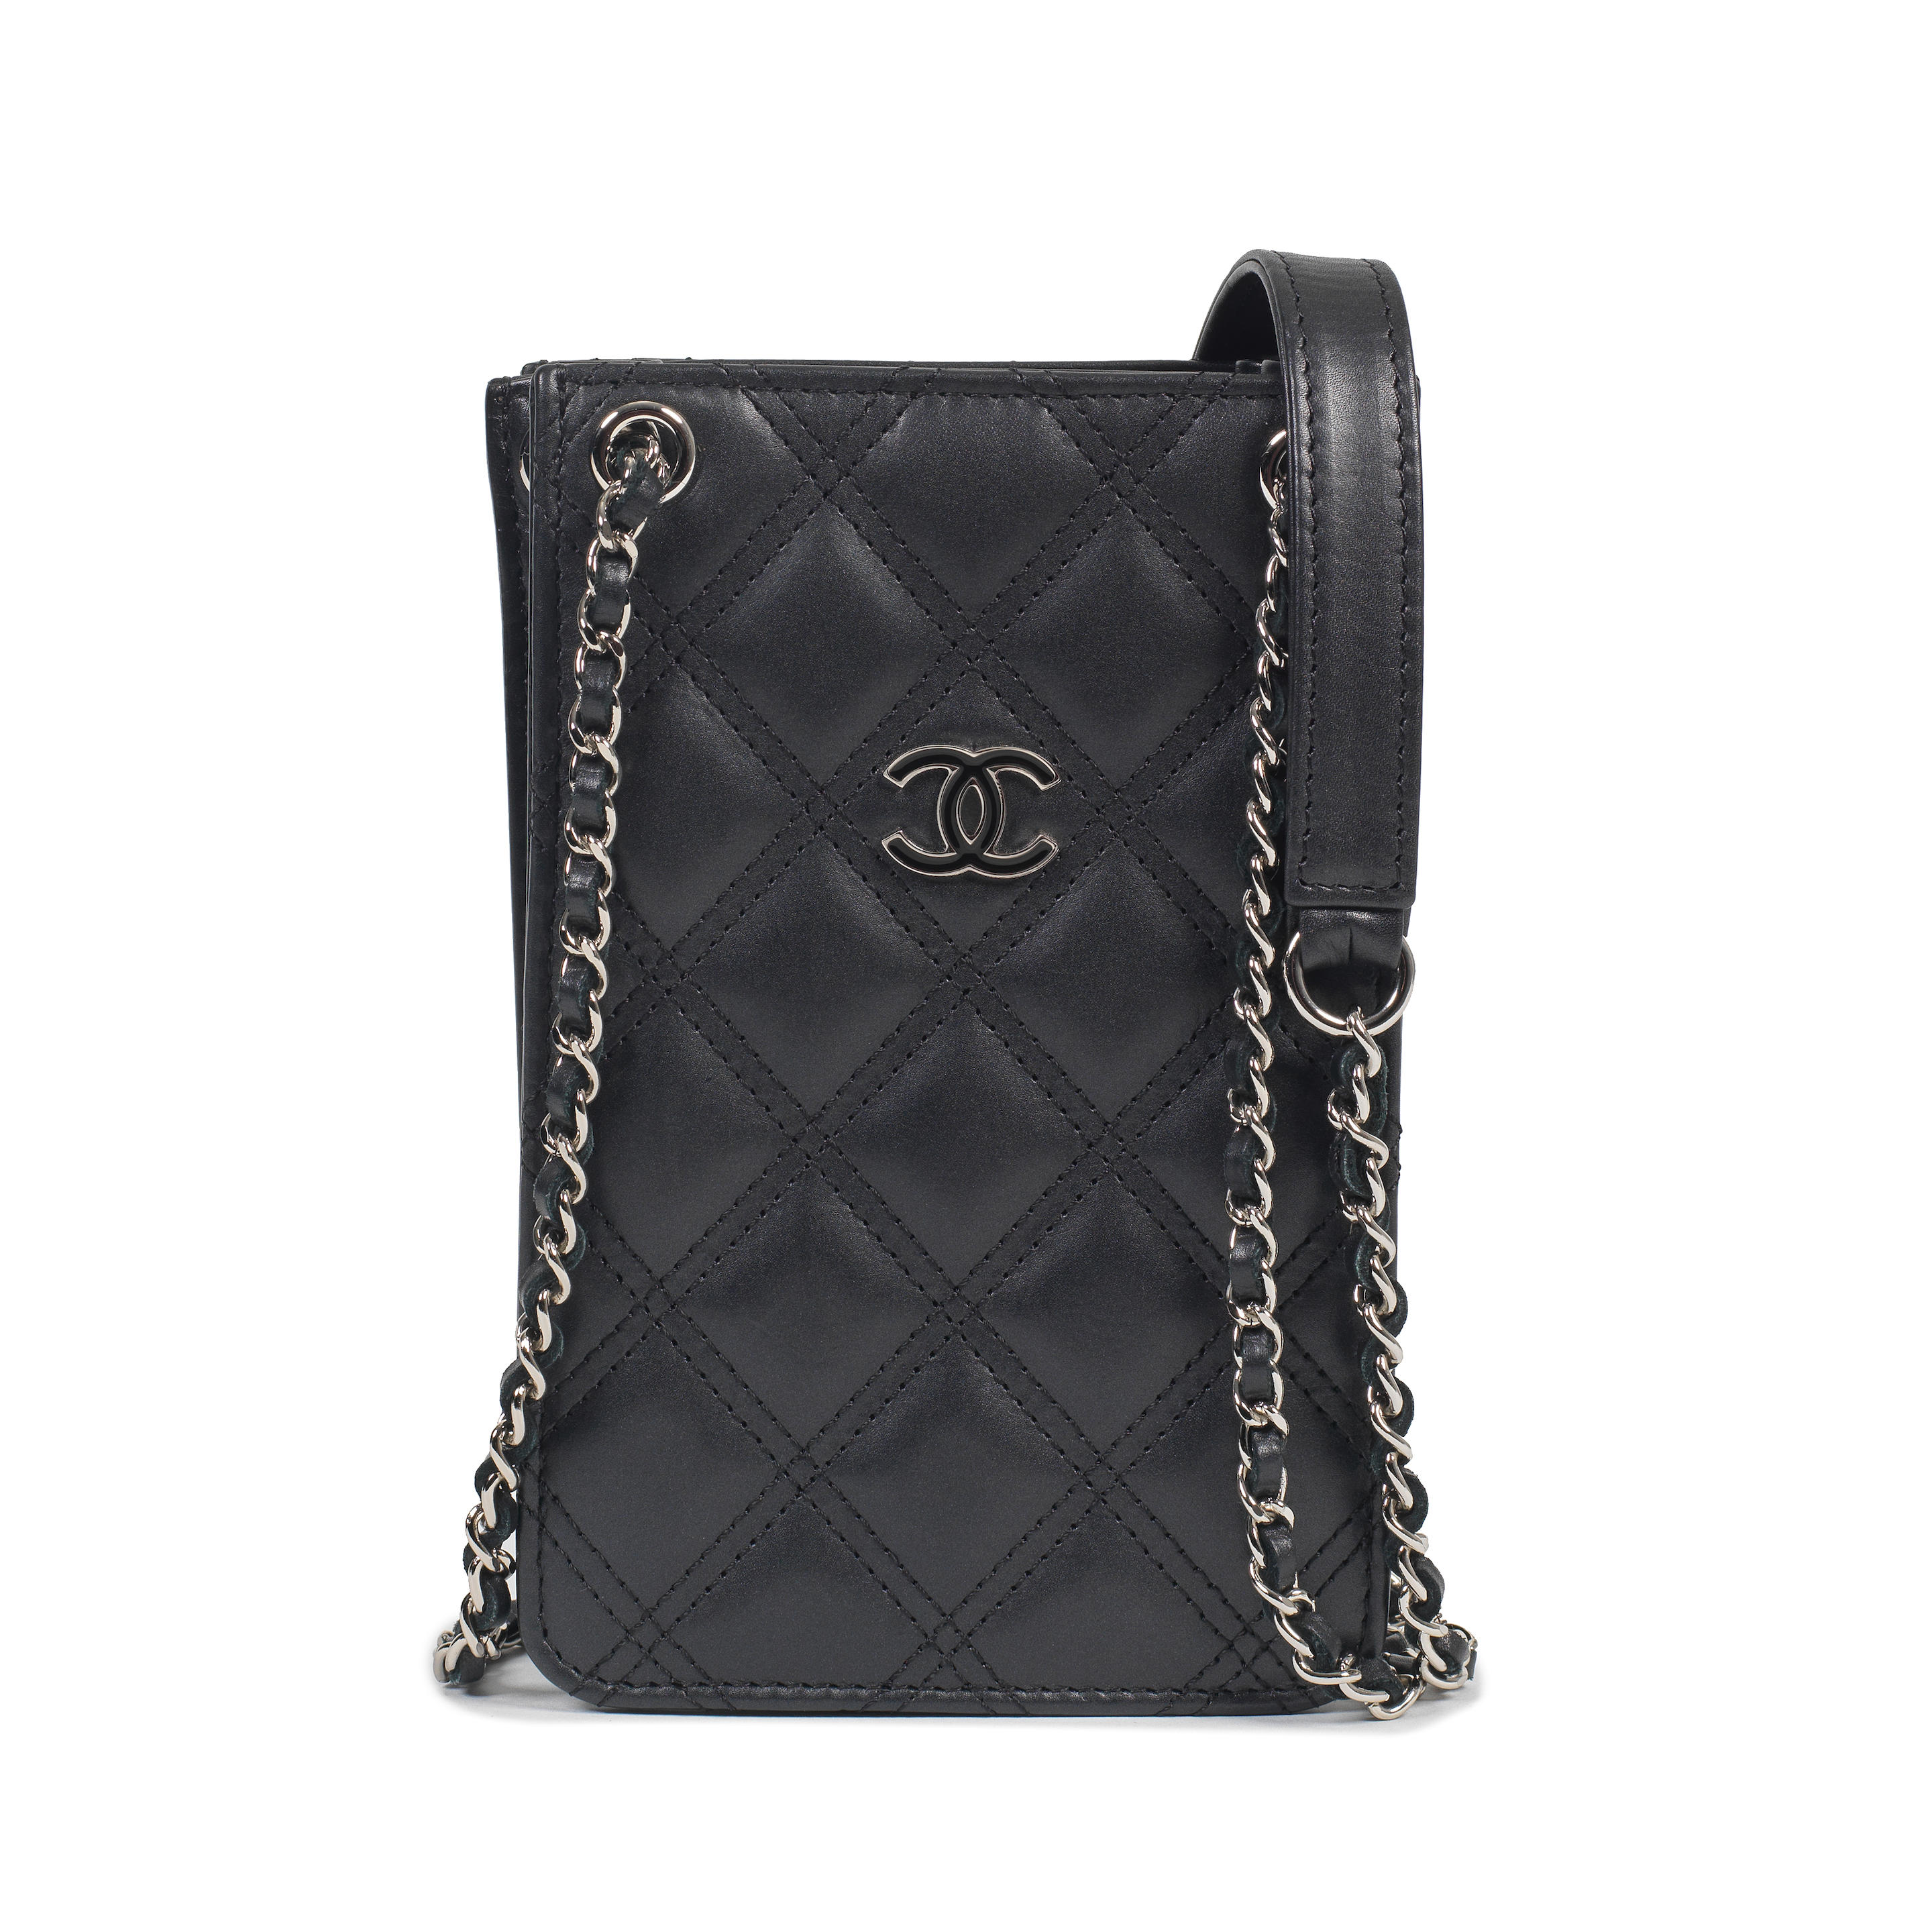 Bonhams : Karl Lagerfeld for Chanel a Black Quilted Crossbody Phone Holder  2014-15 (includes serial sticker)